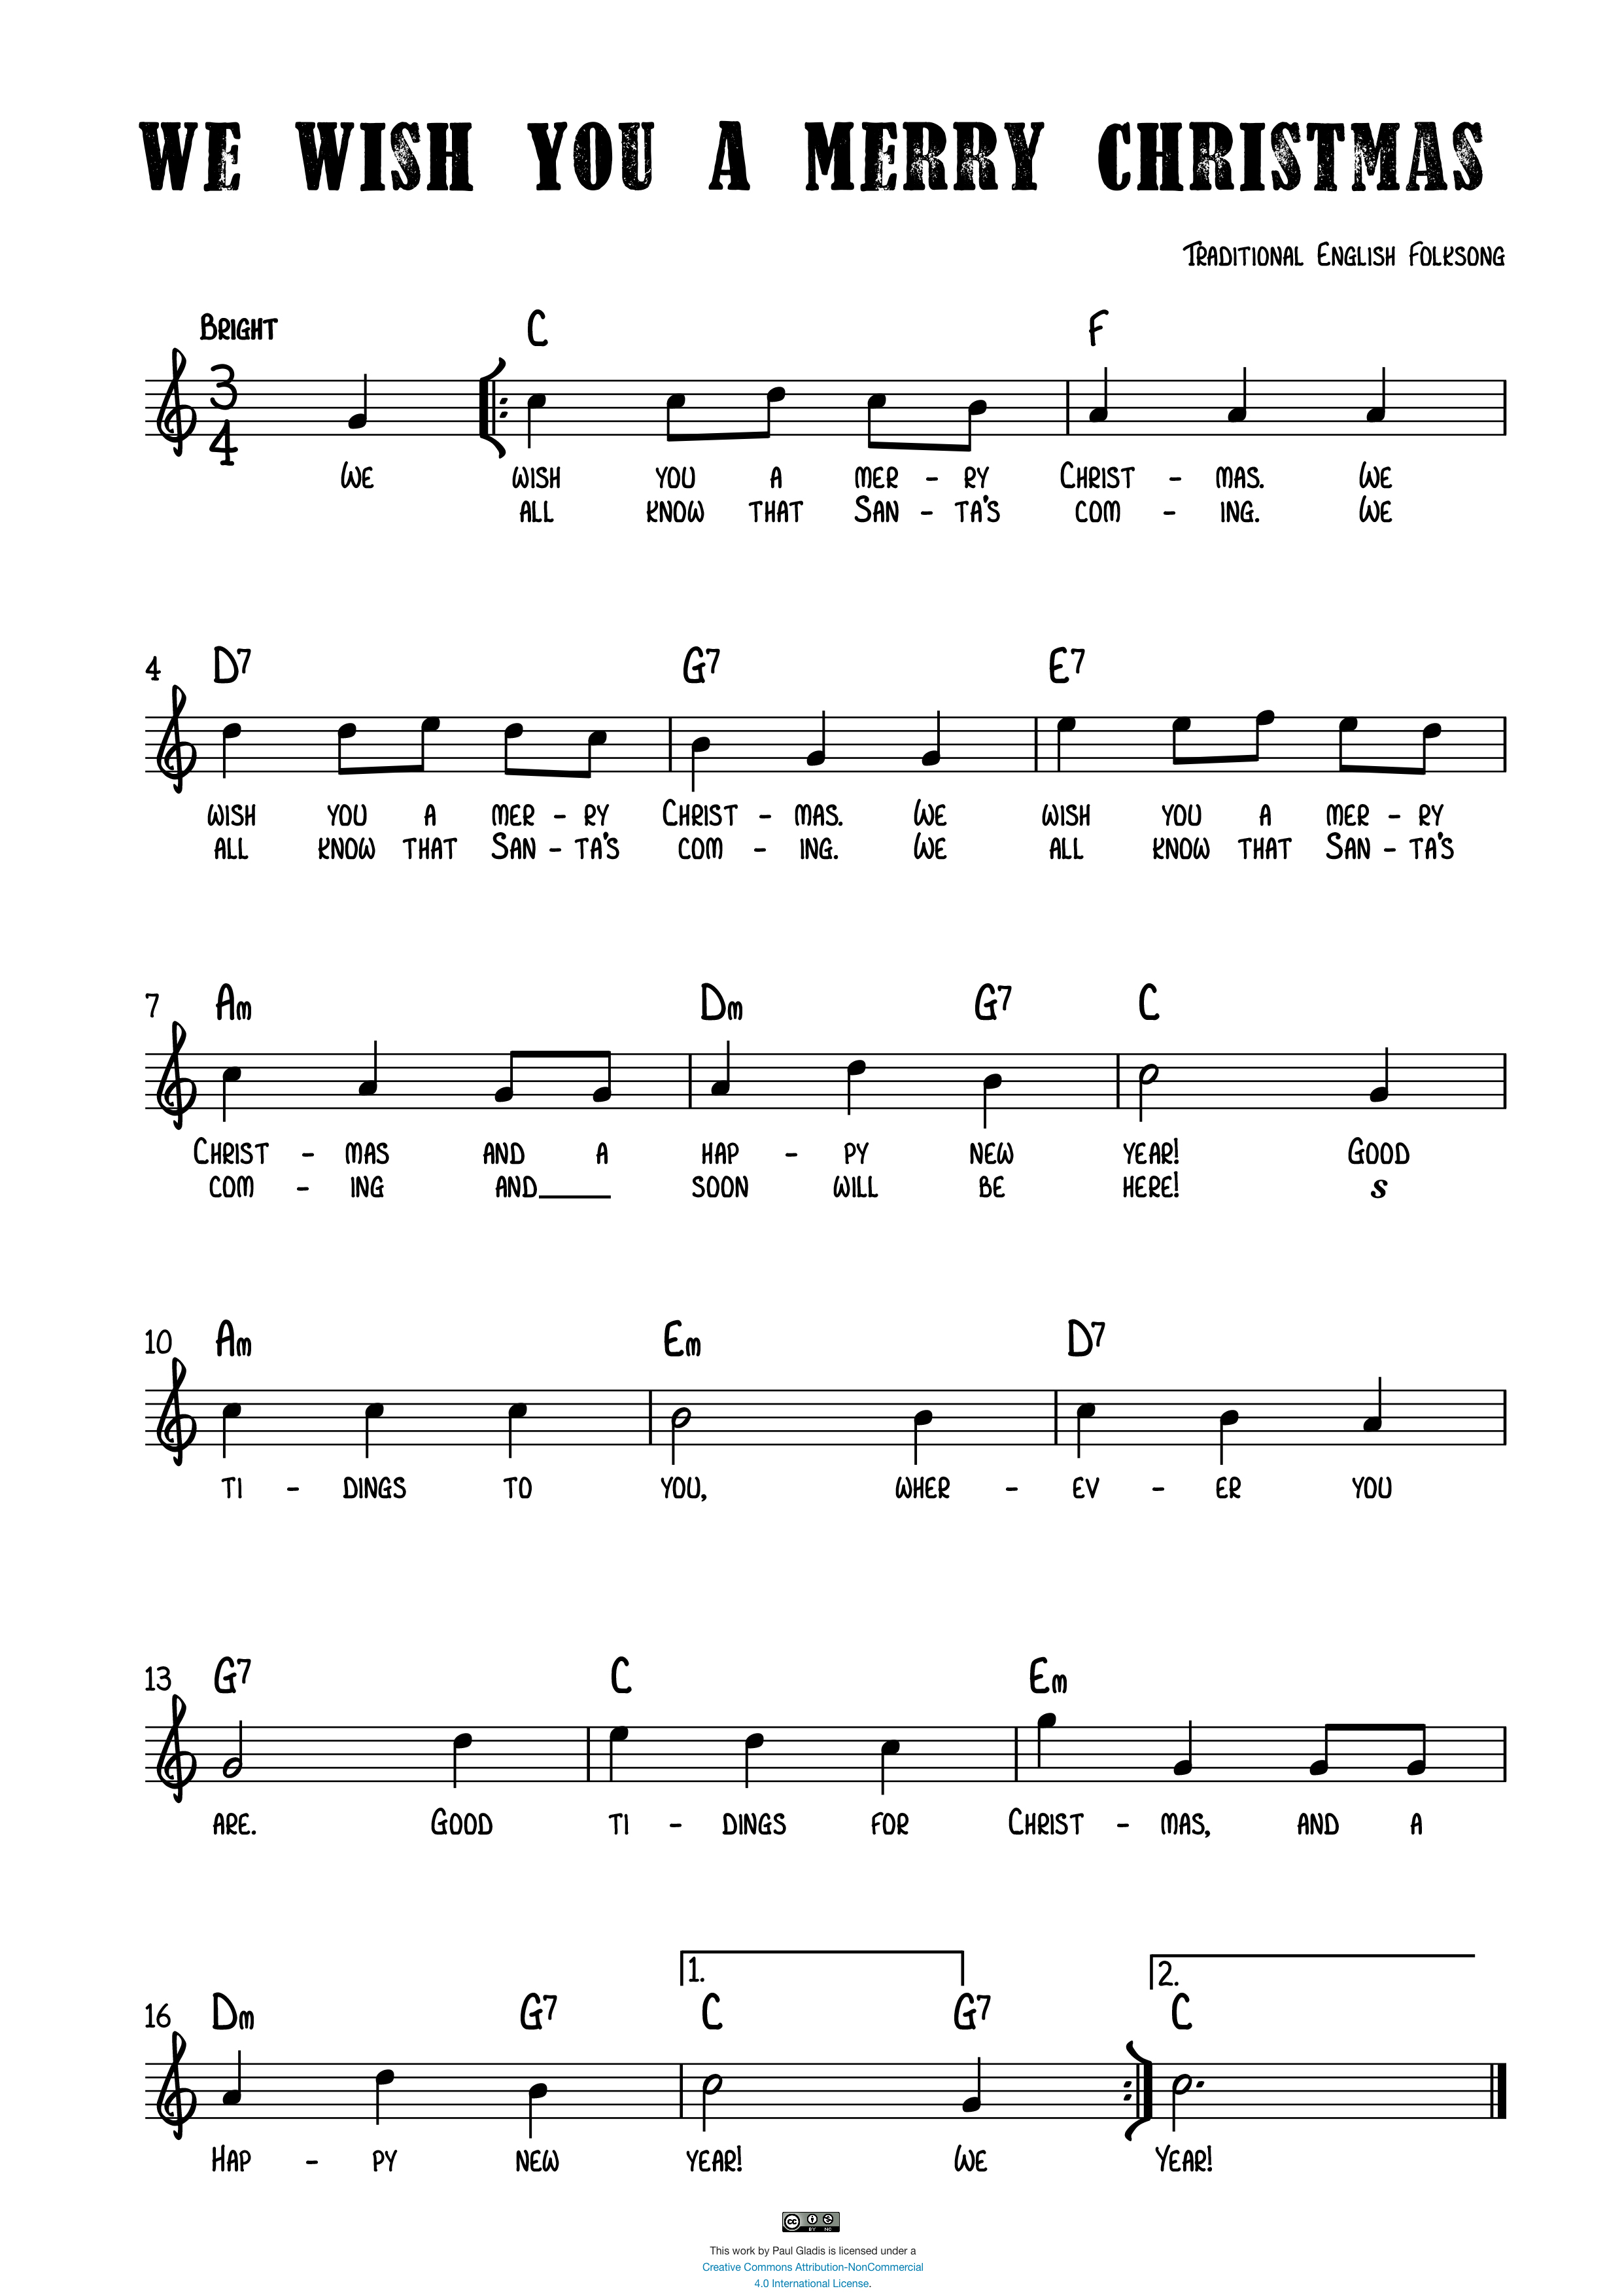 Sheet Music by Paul Gladis » We Wish You a Merry Christmas